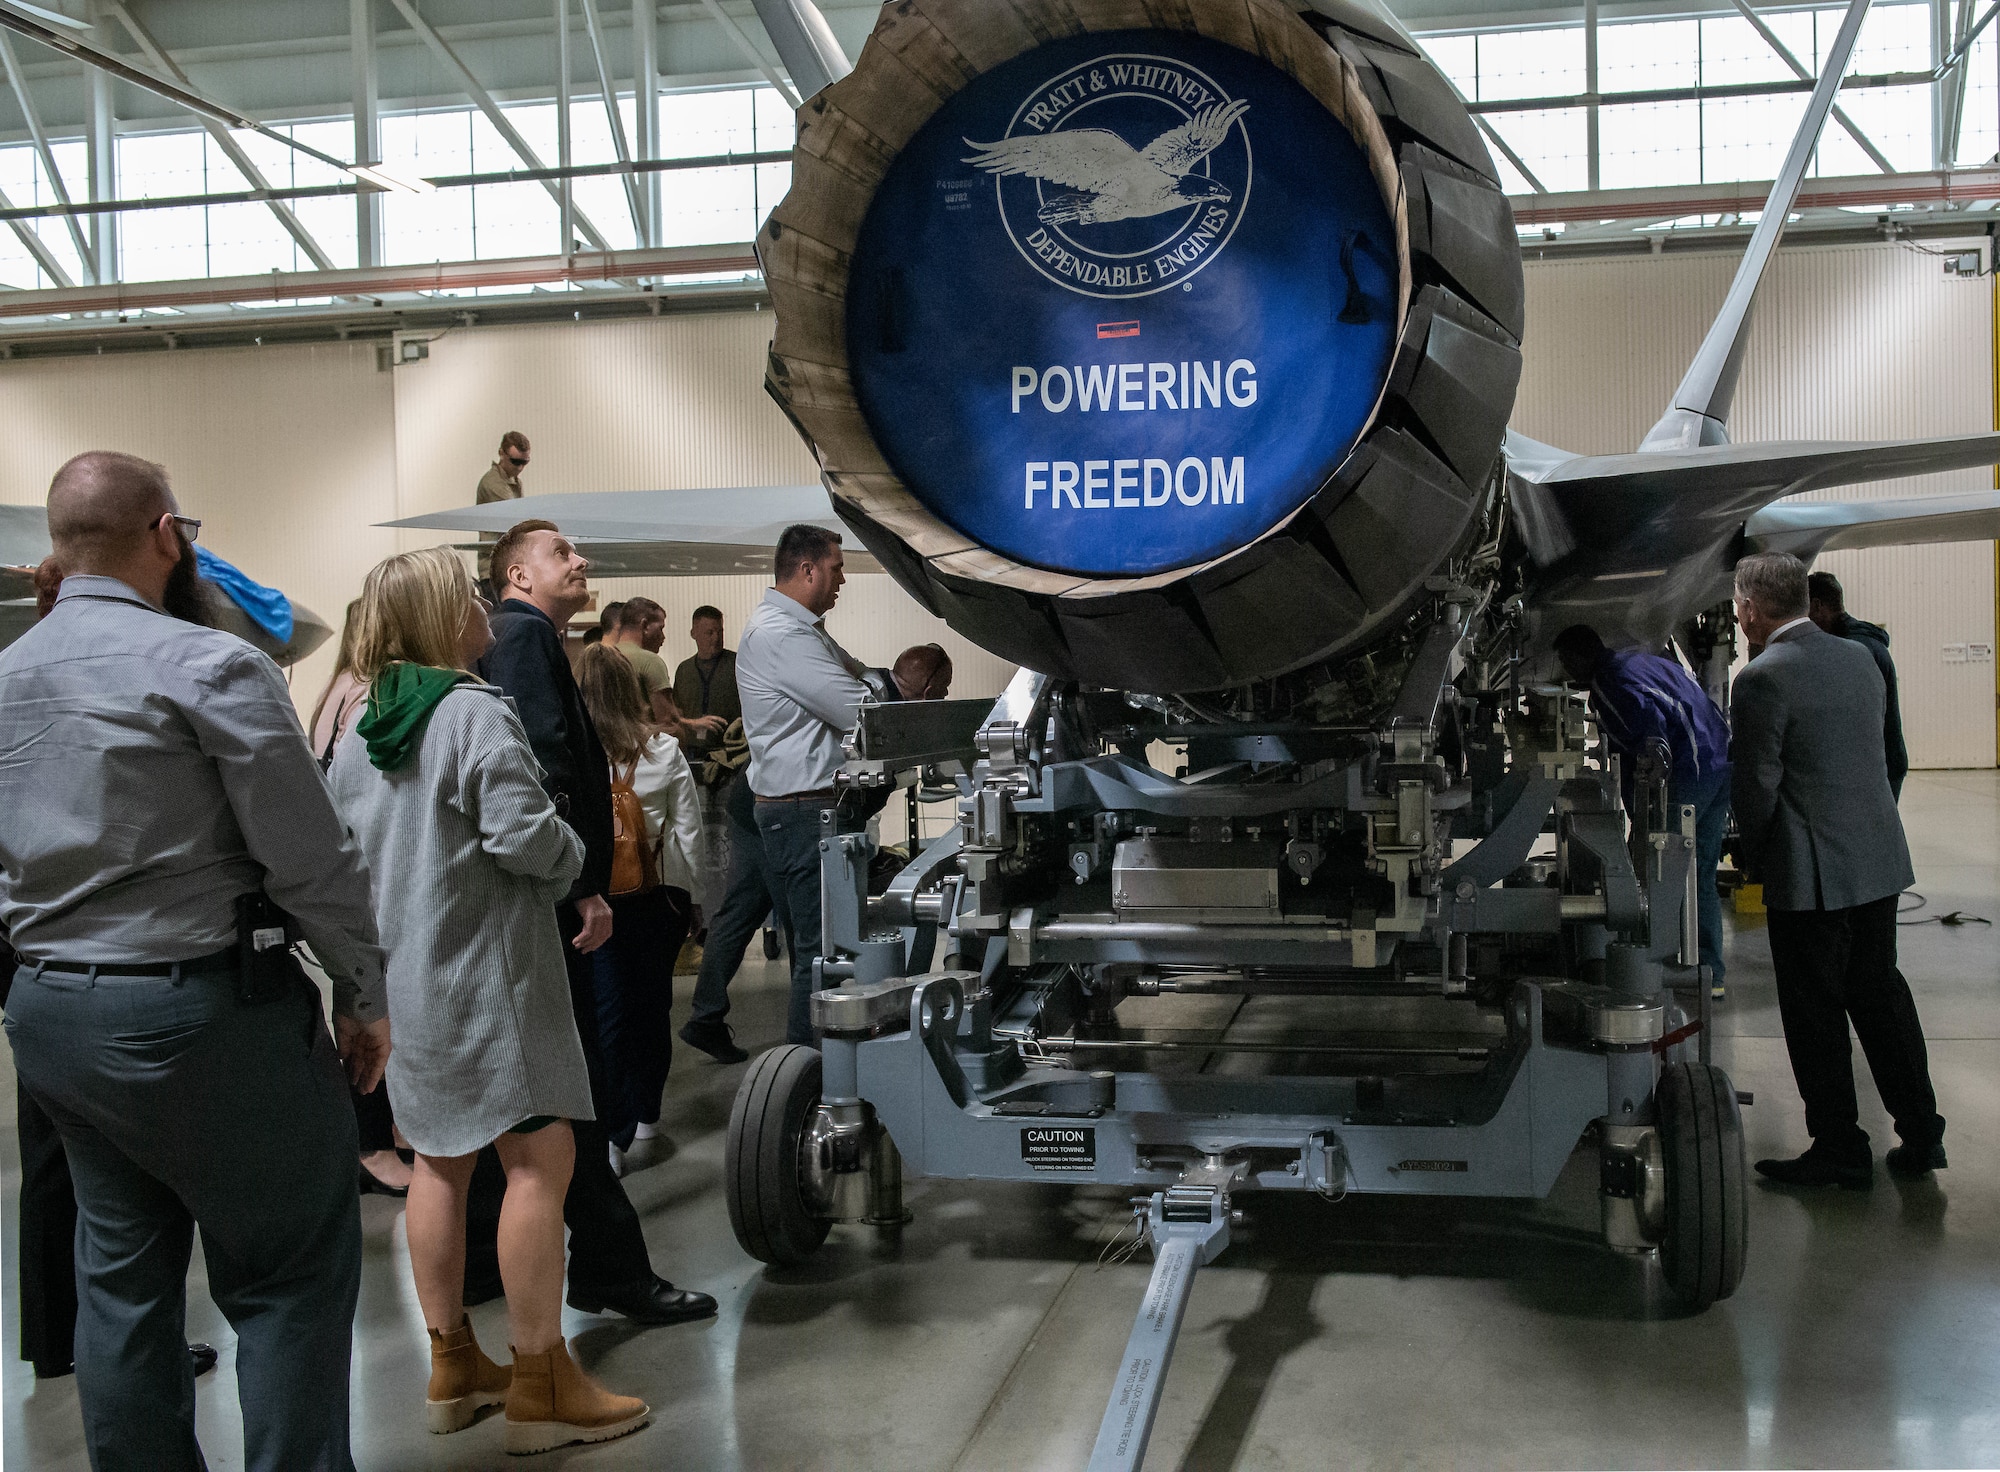 Phoenix area educators tour an F-35 Lightning II aircraft assigned to the 62nd Fighter Squadron, during the West Valley Educators Immersion Tour, March 31st, 2023, at Luke Air Force Base, Arizona.